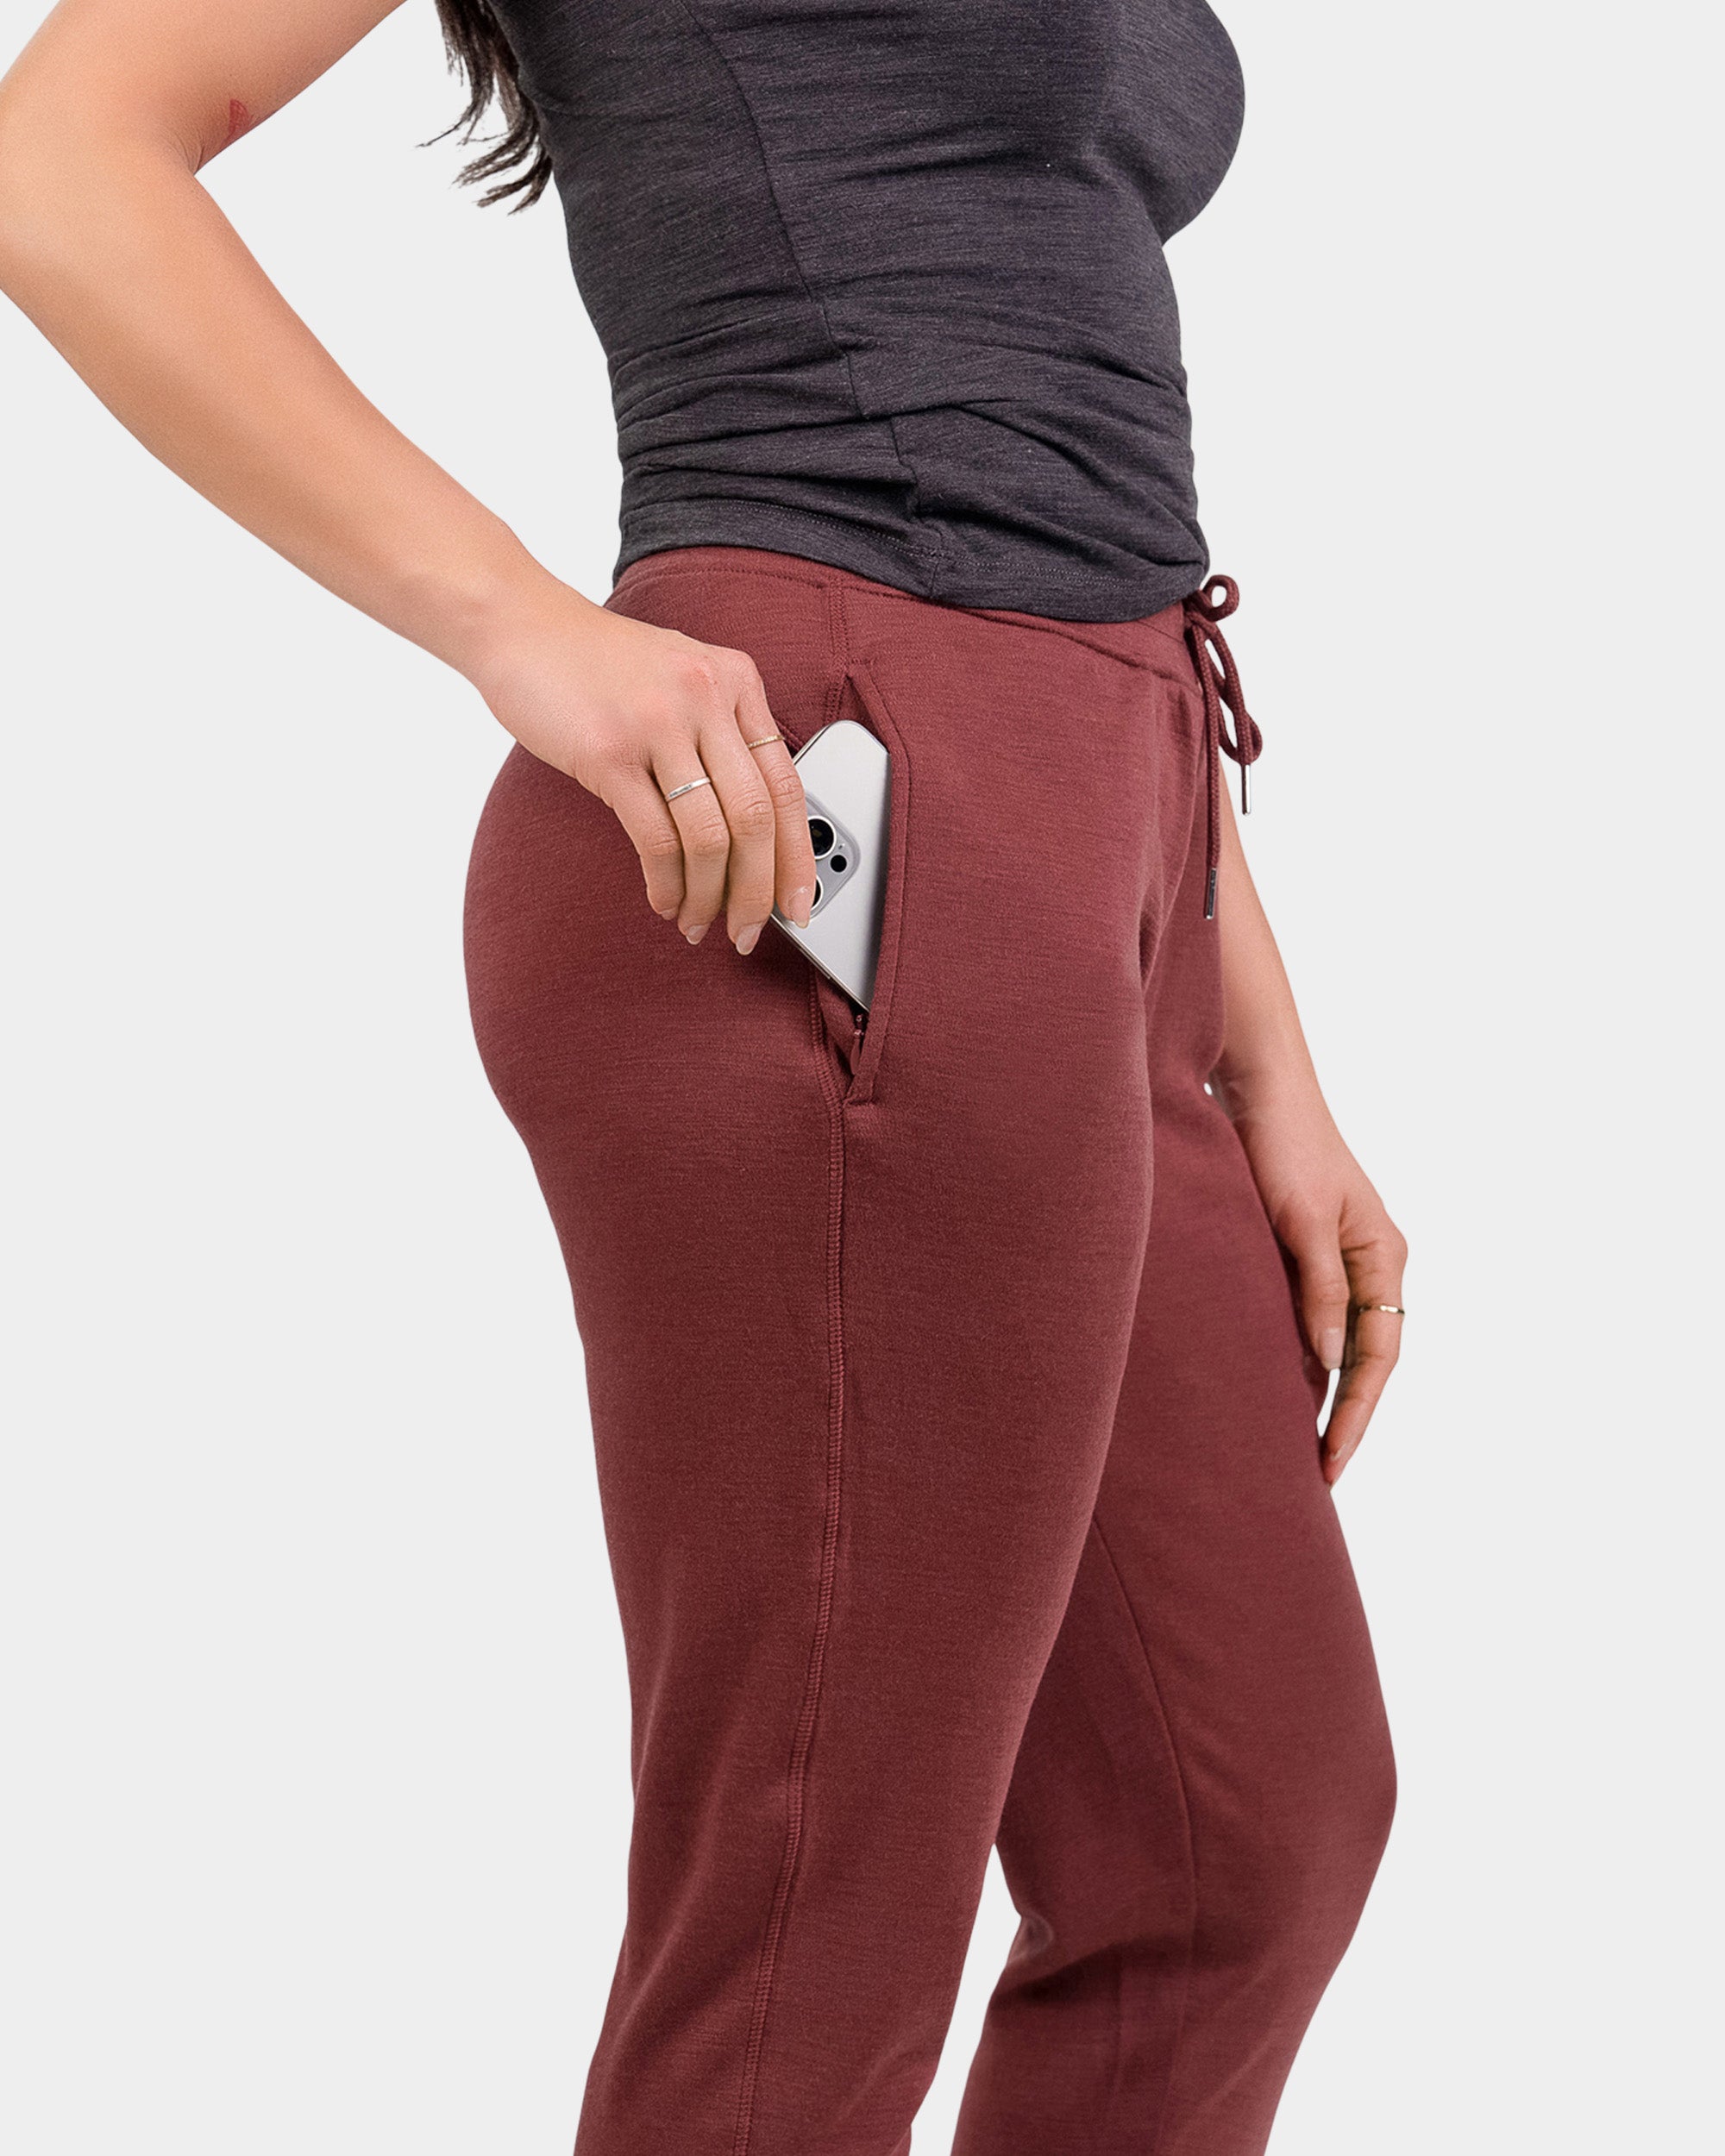 Womens Joggers in Womens Pants 